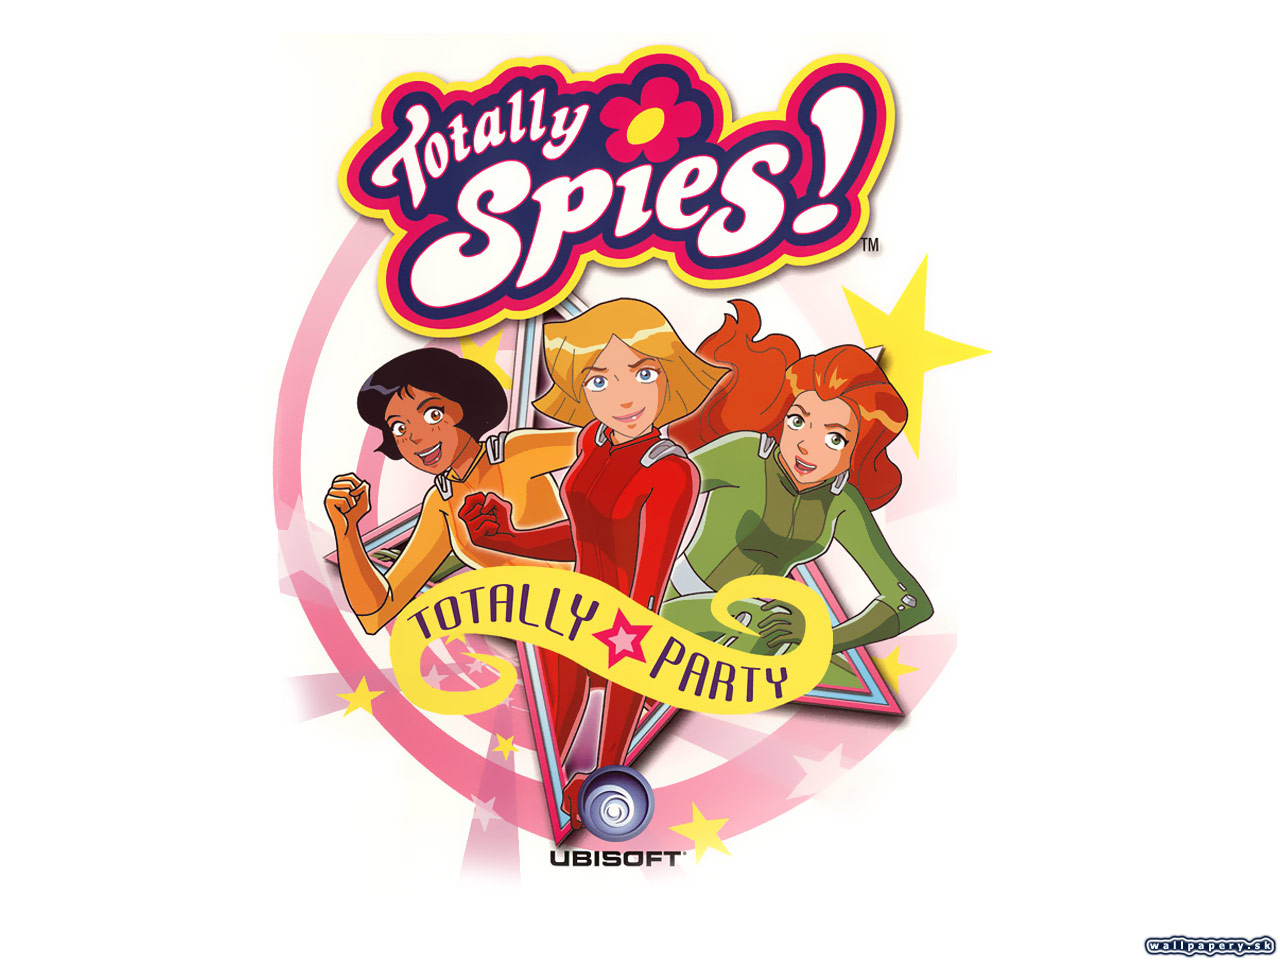 Totally Spies! Totally Party - wallpaper 1